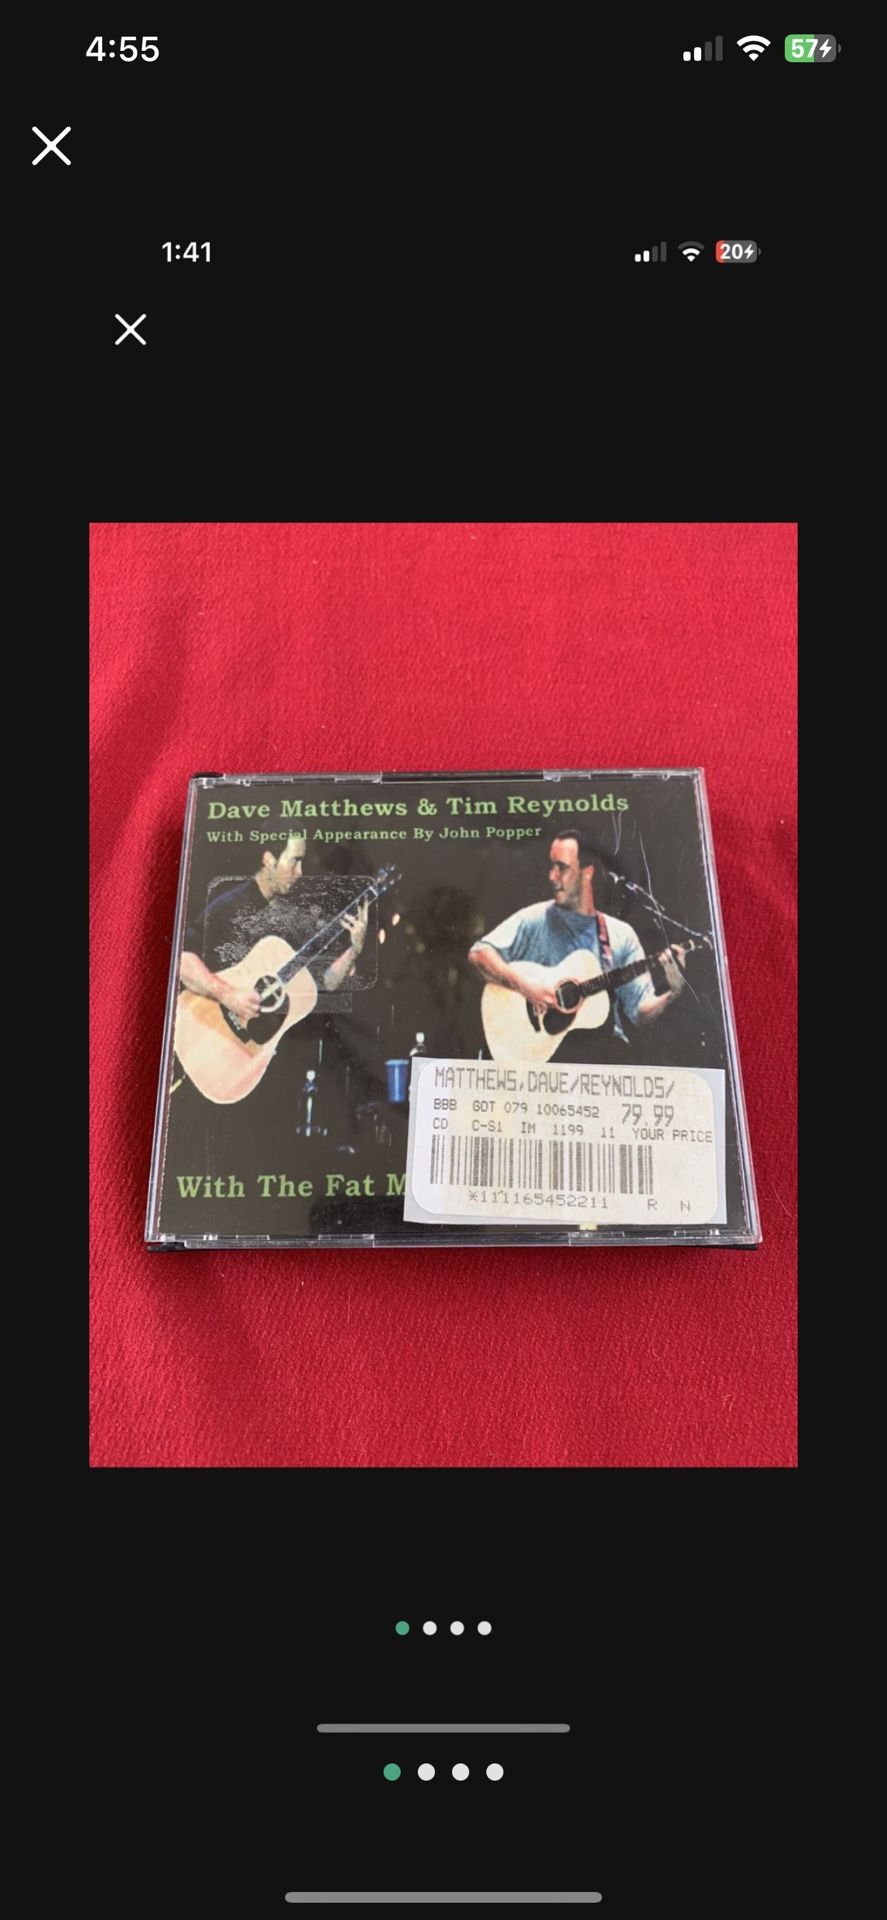 Music  Dave Matthew’s VERY RARE 3 CD live recording concert with Dave, Tim Reynolds and John Popper. It is “not” Live From Luther College. This is a v